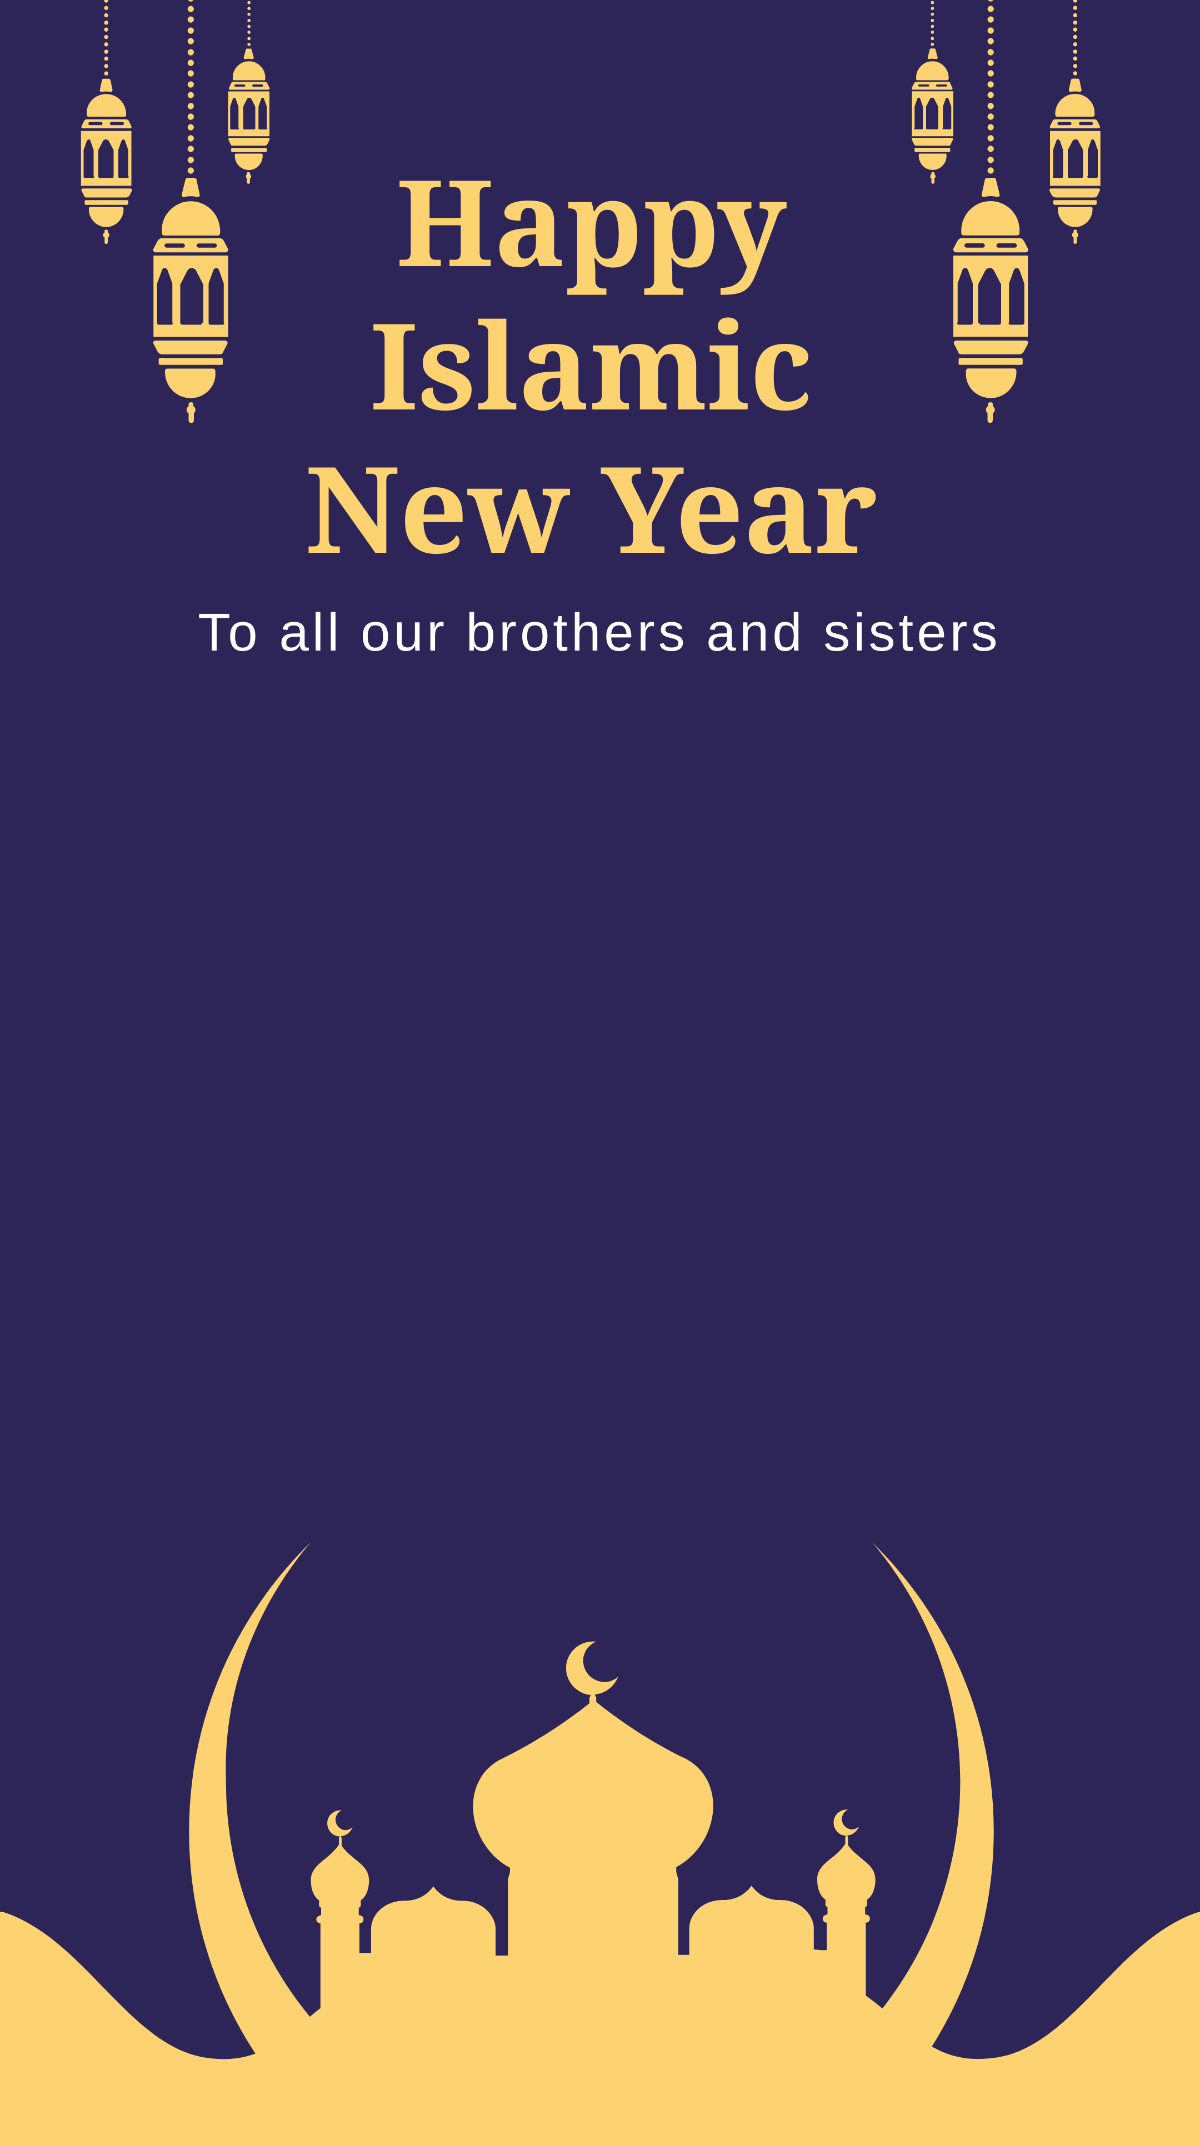 Islamic New Year Snapchat Geofilter Template